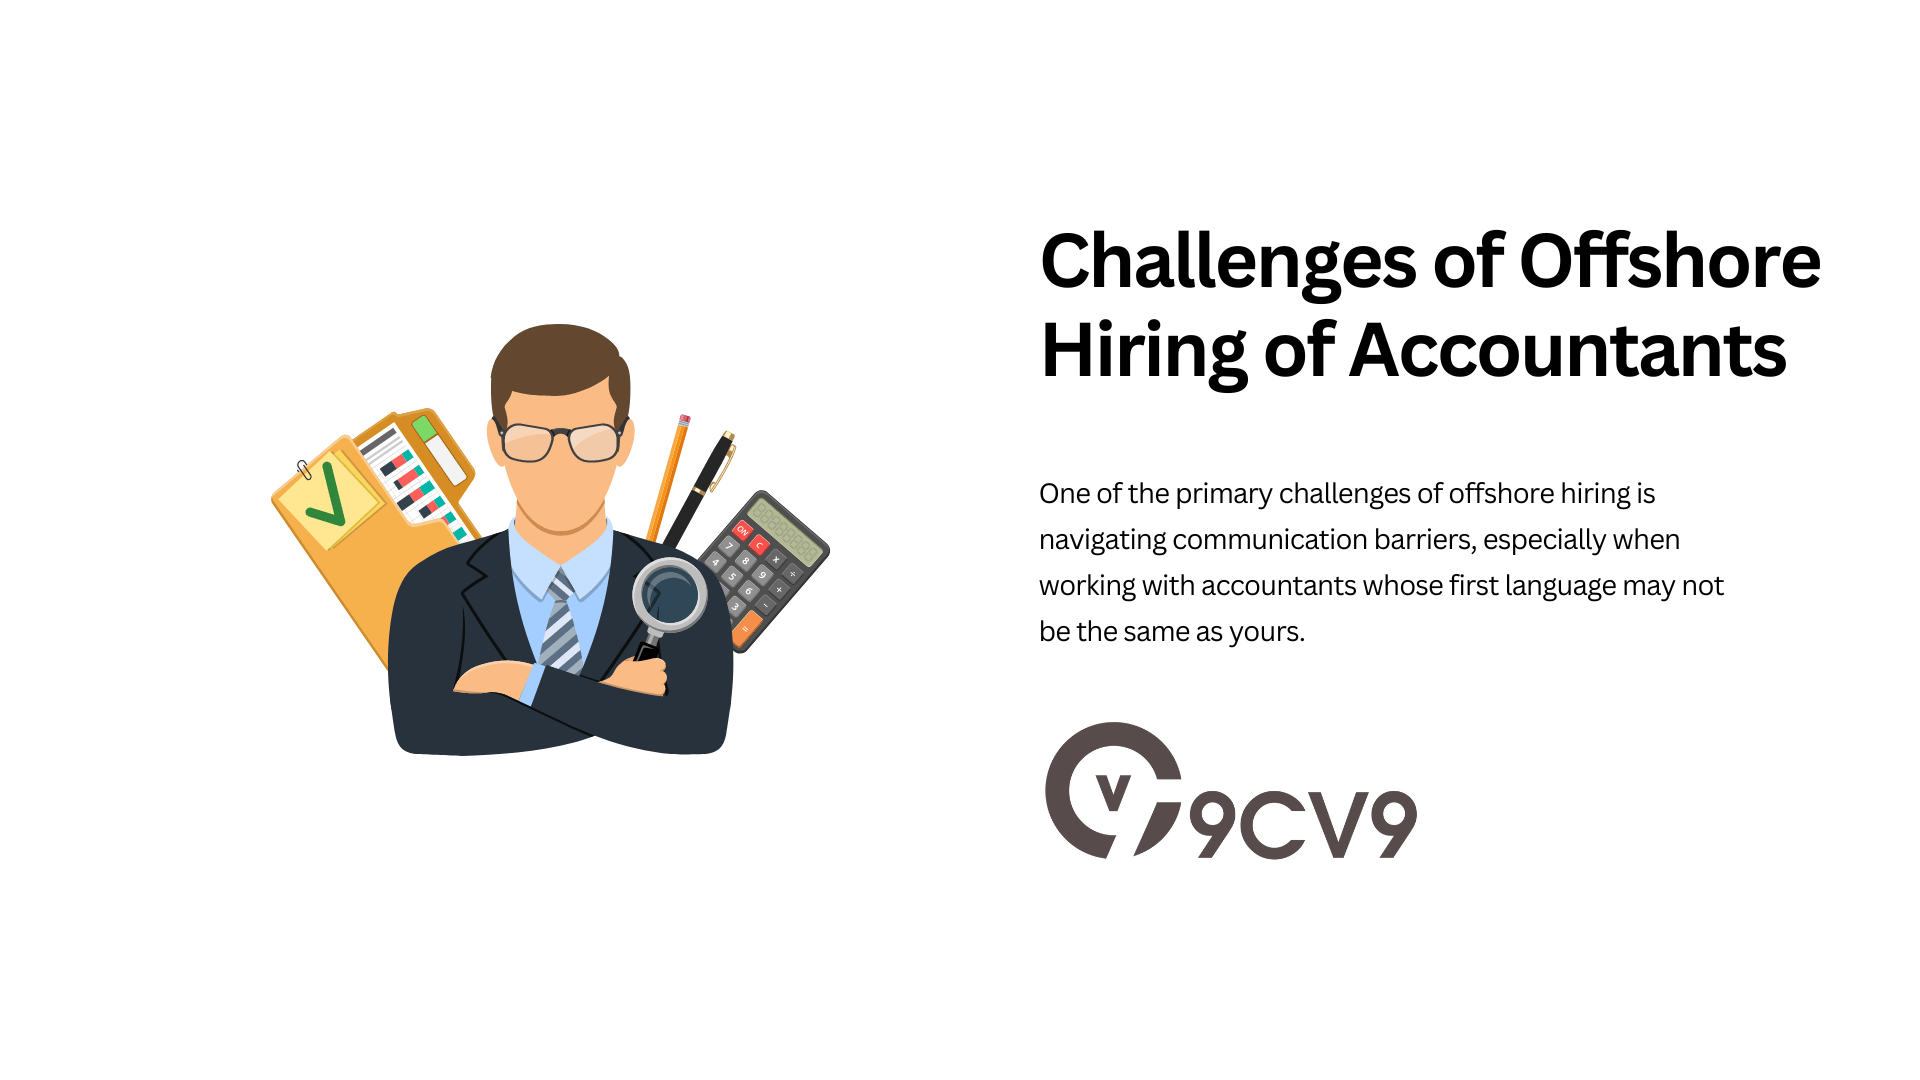 Challenges of Offshore Hiring of Accountants and How to Overcome Them